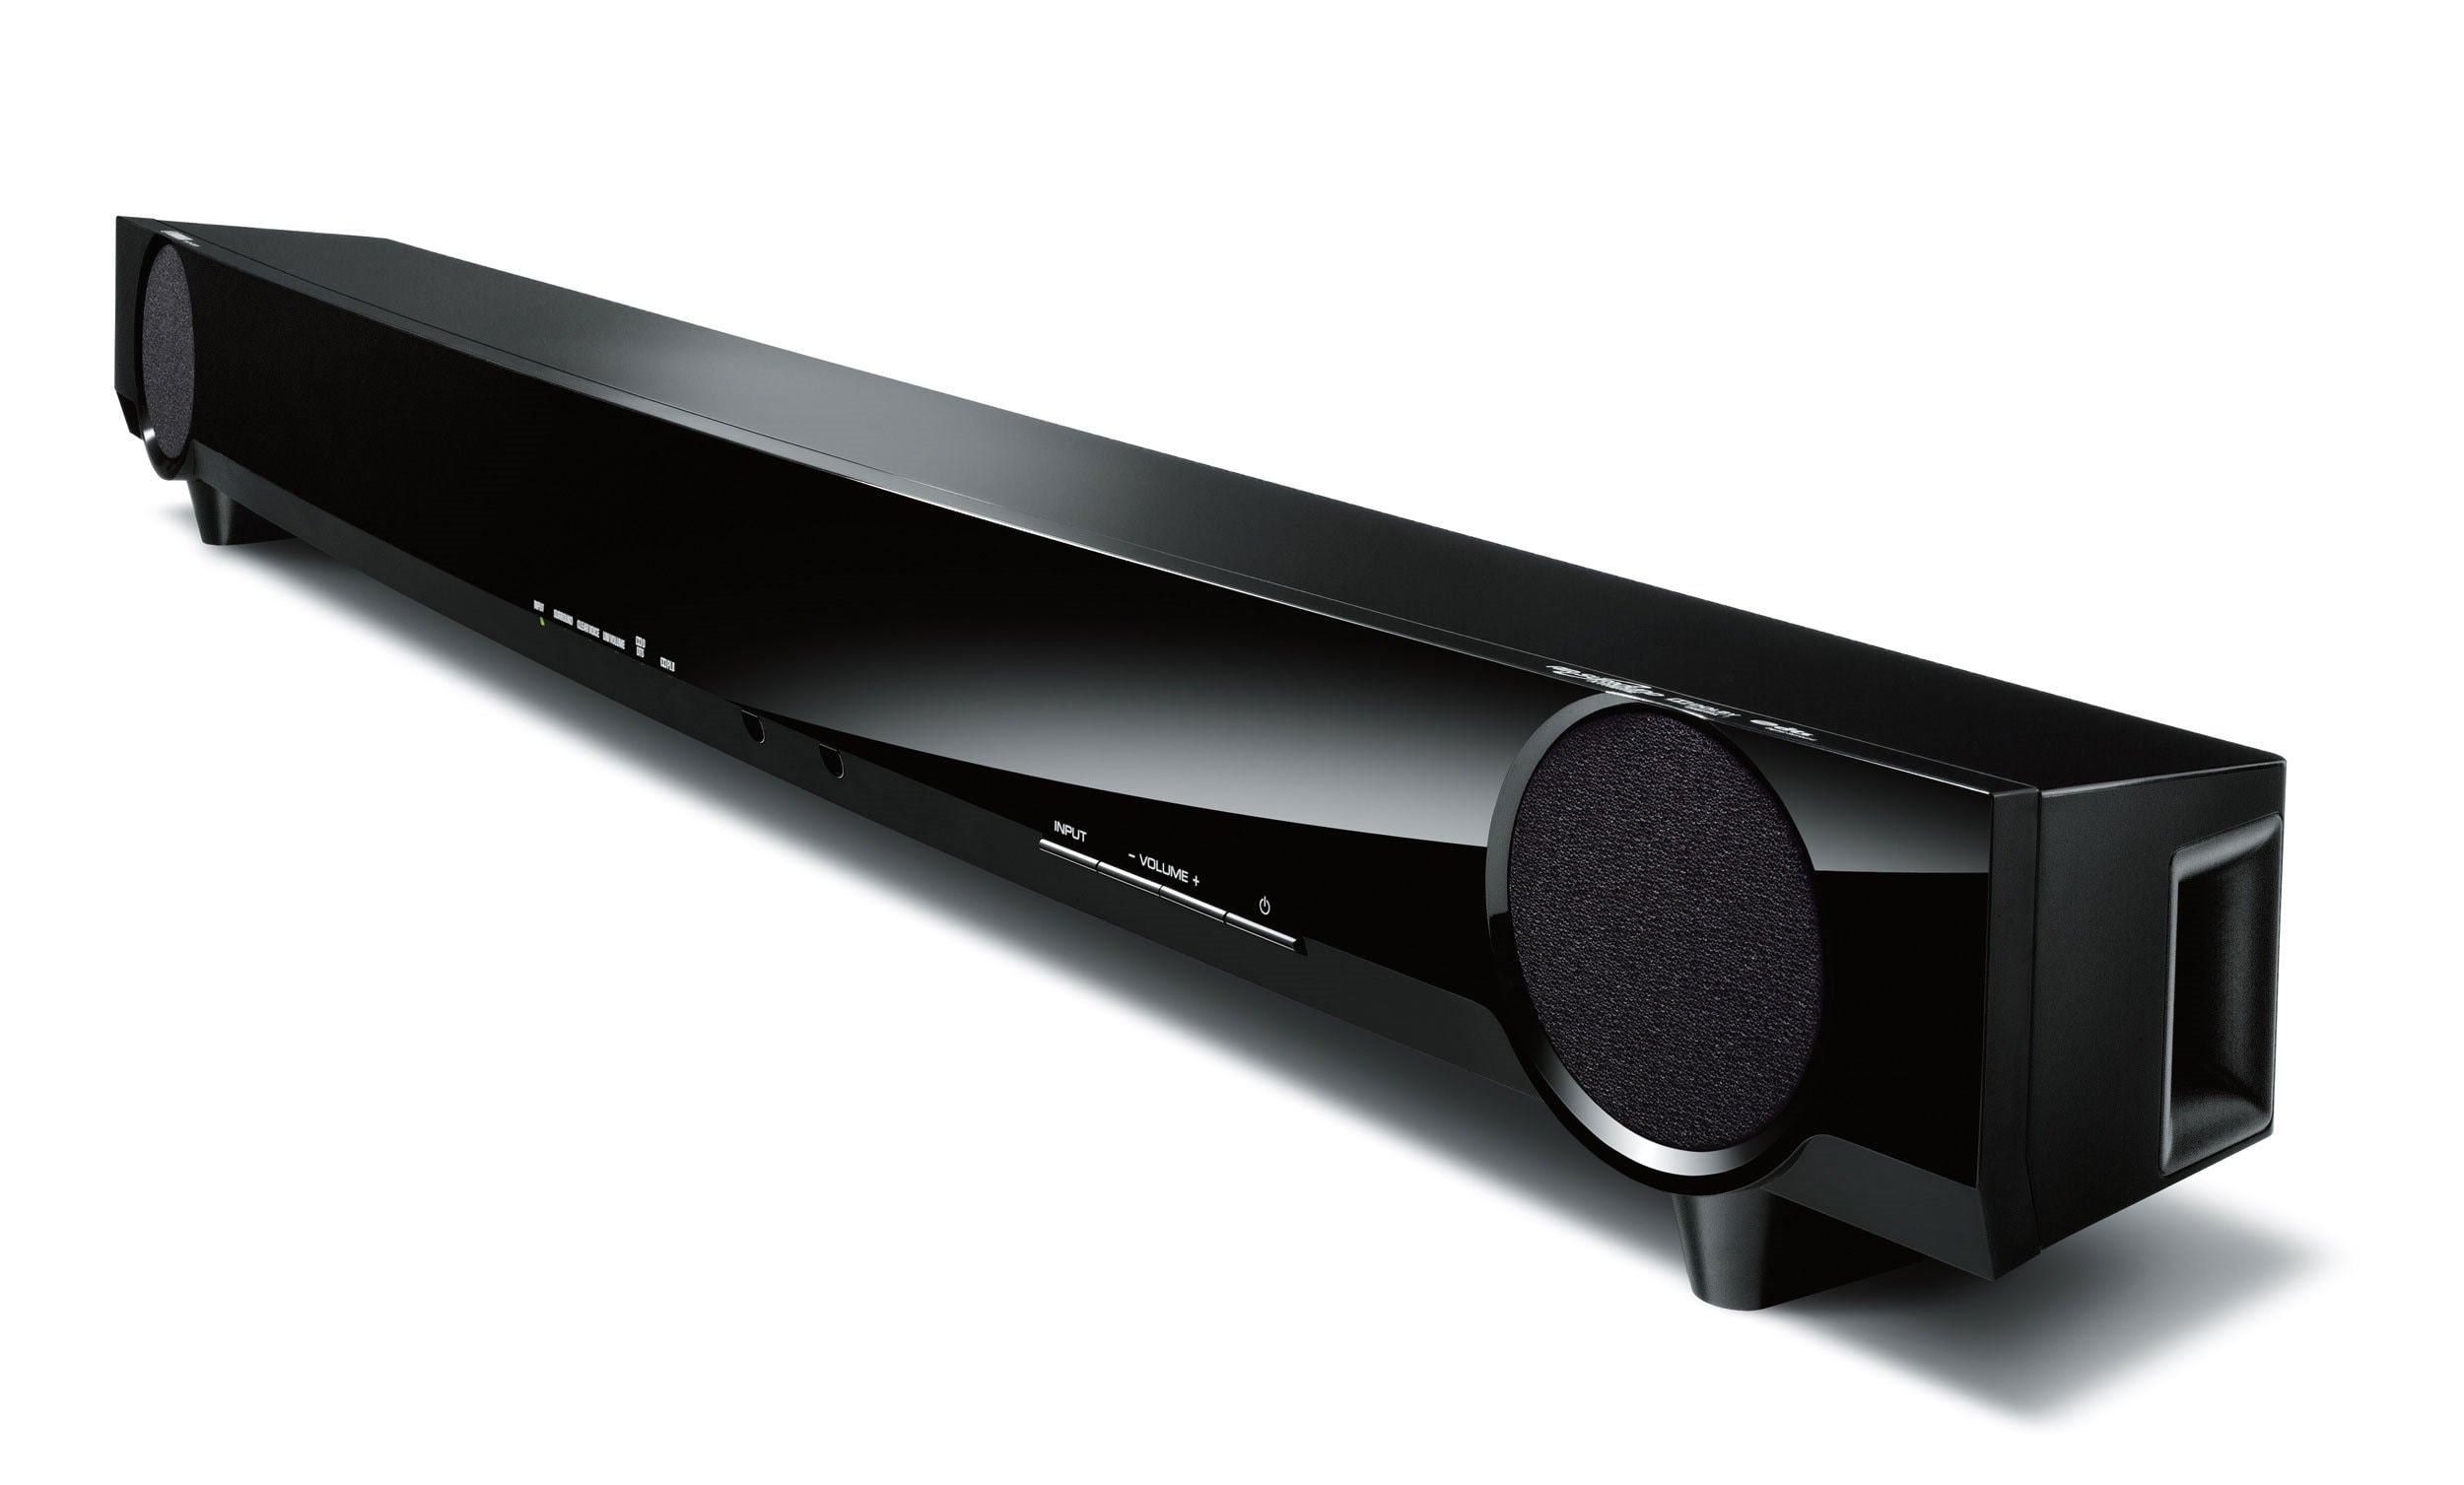 YAS-101 - Overview - Sound Bar - Audio 